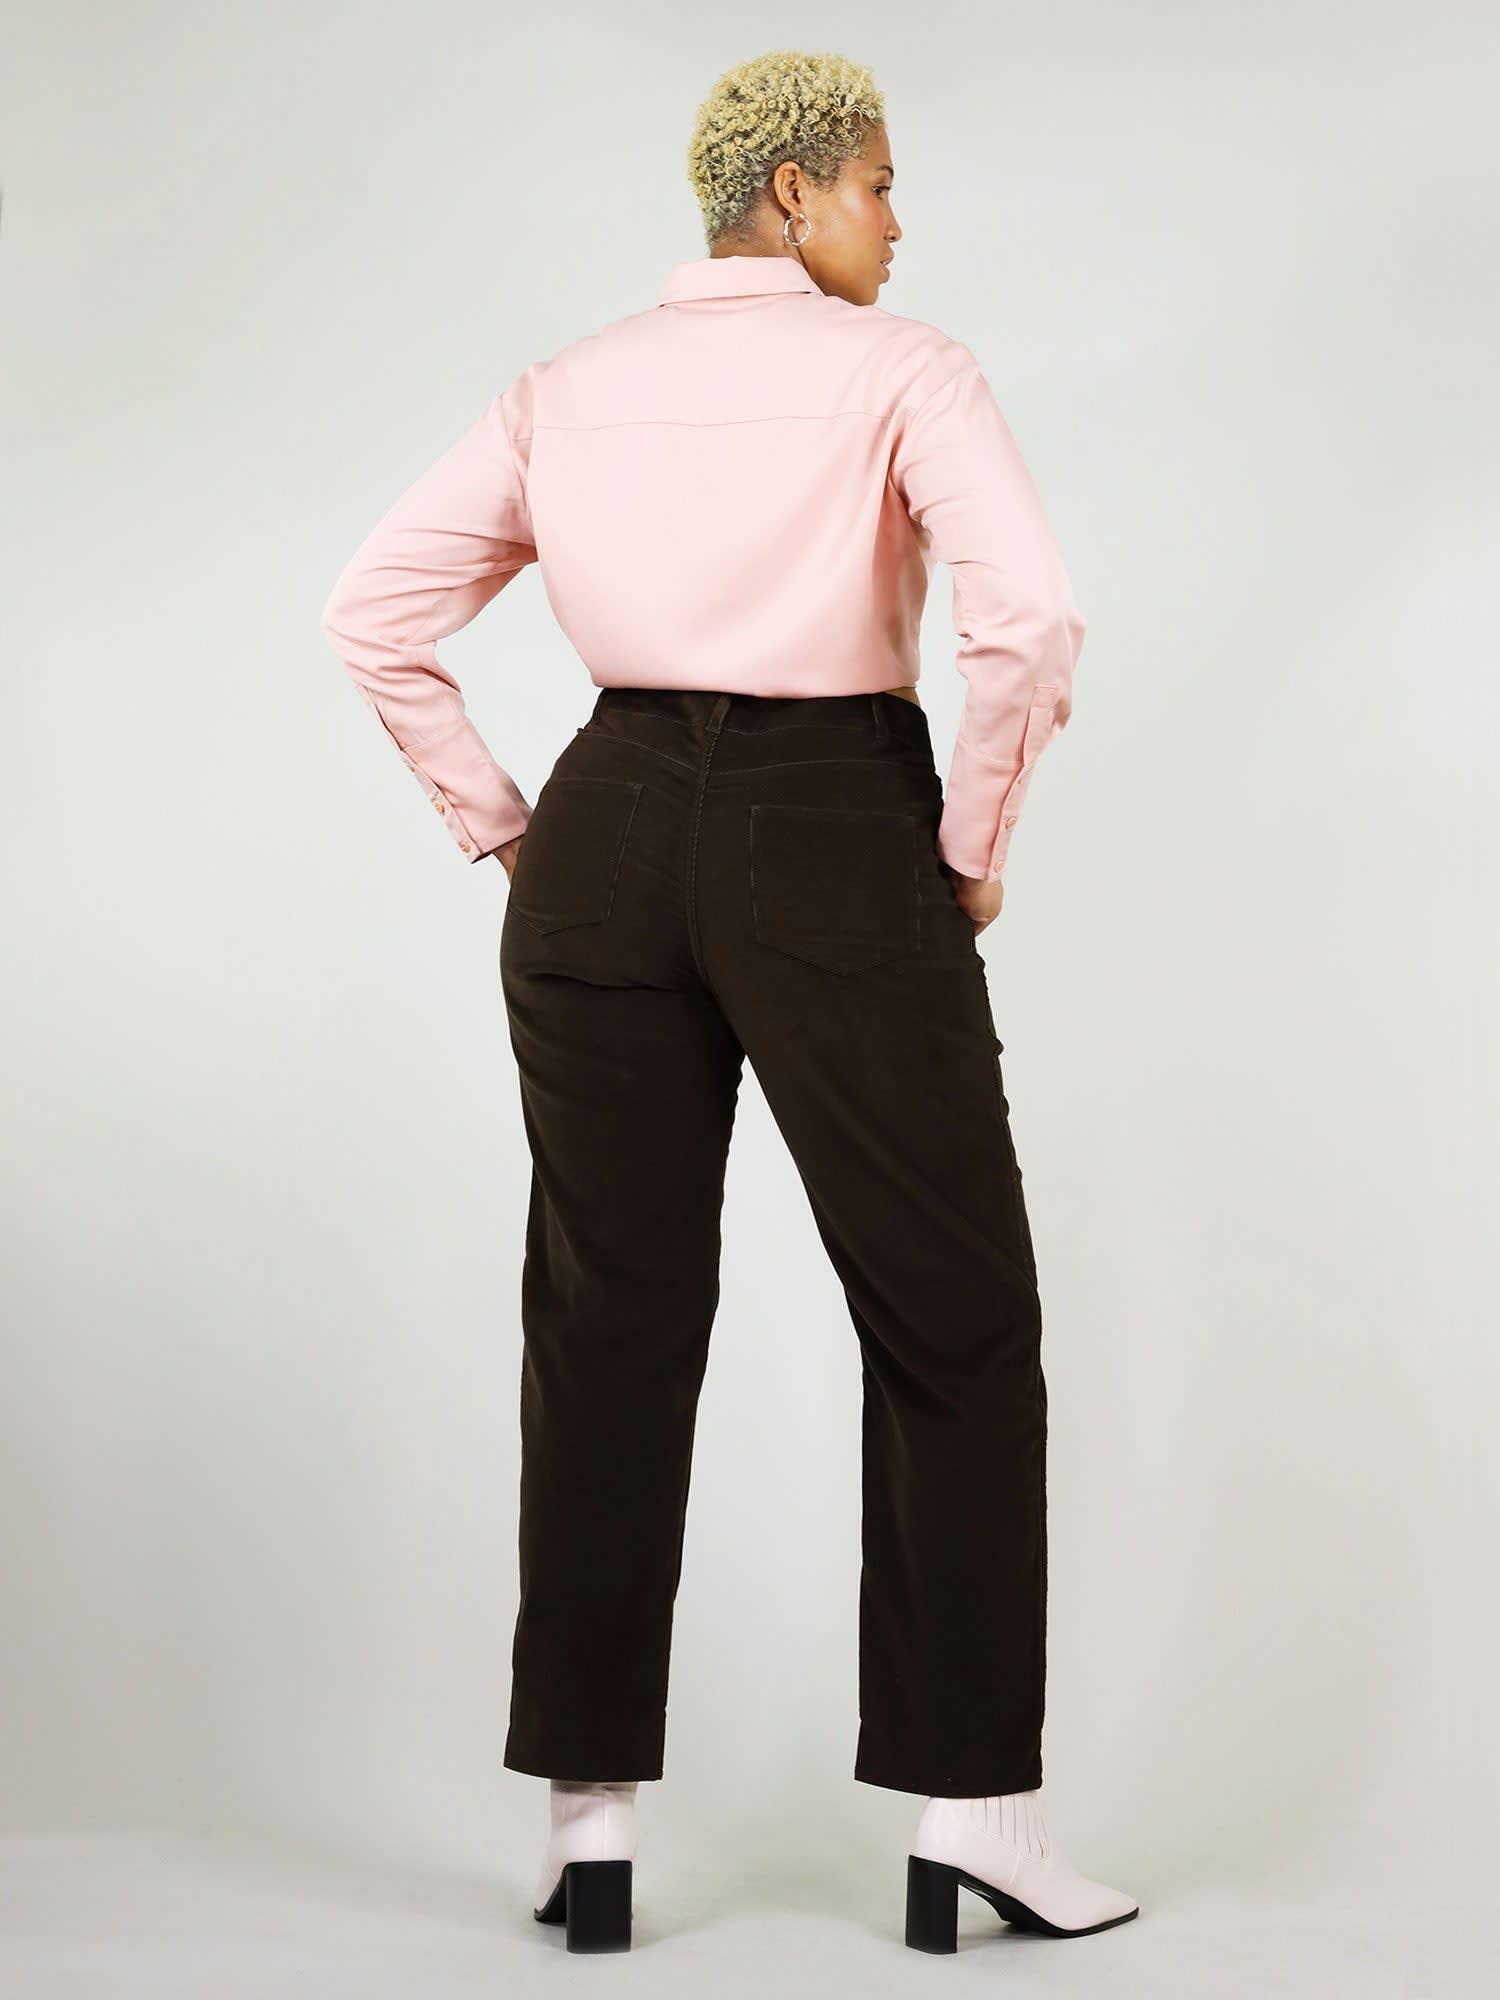 Corduroy High Waisted Trousers In Brown, blonde gone rogue